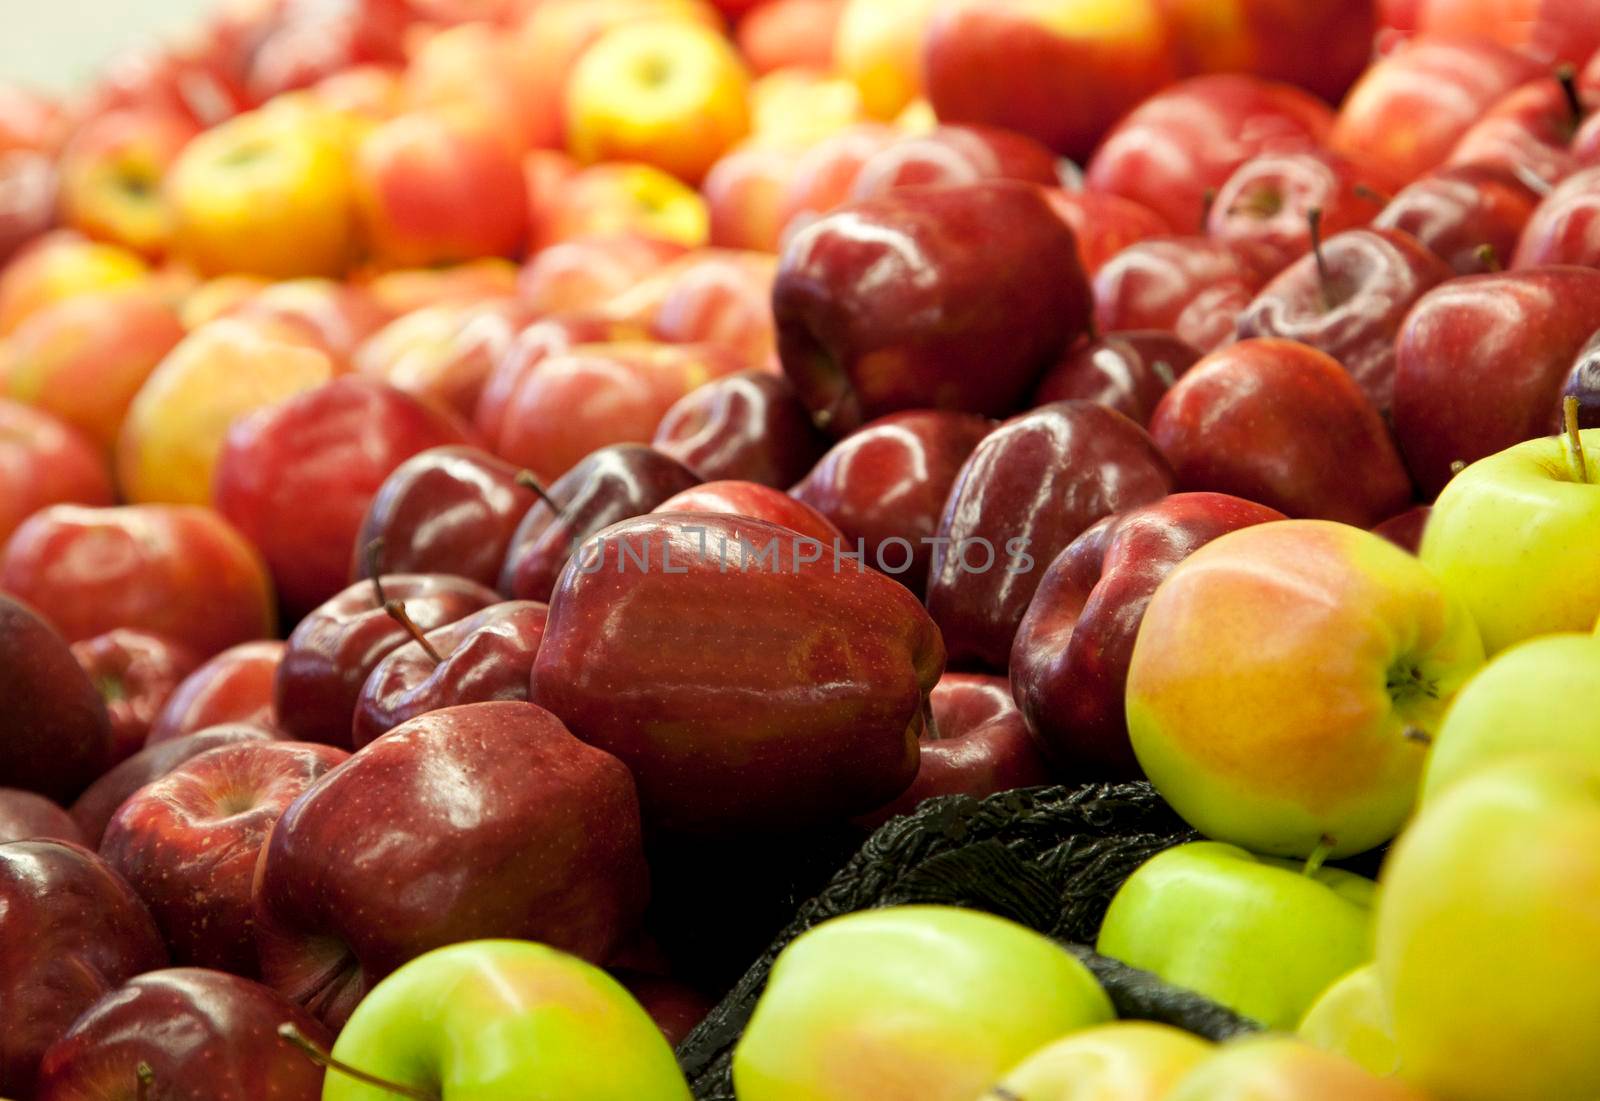  focus on beautiful fresh red apples at a market stand